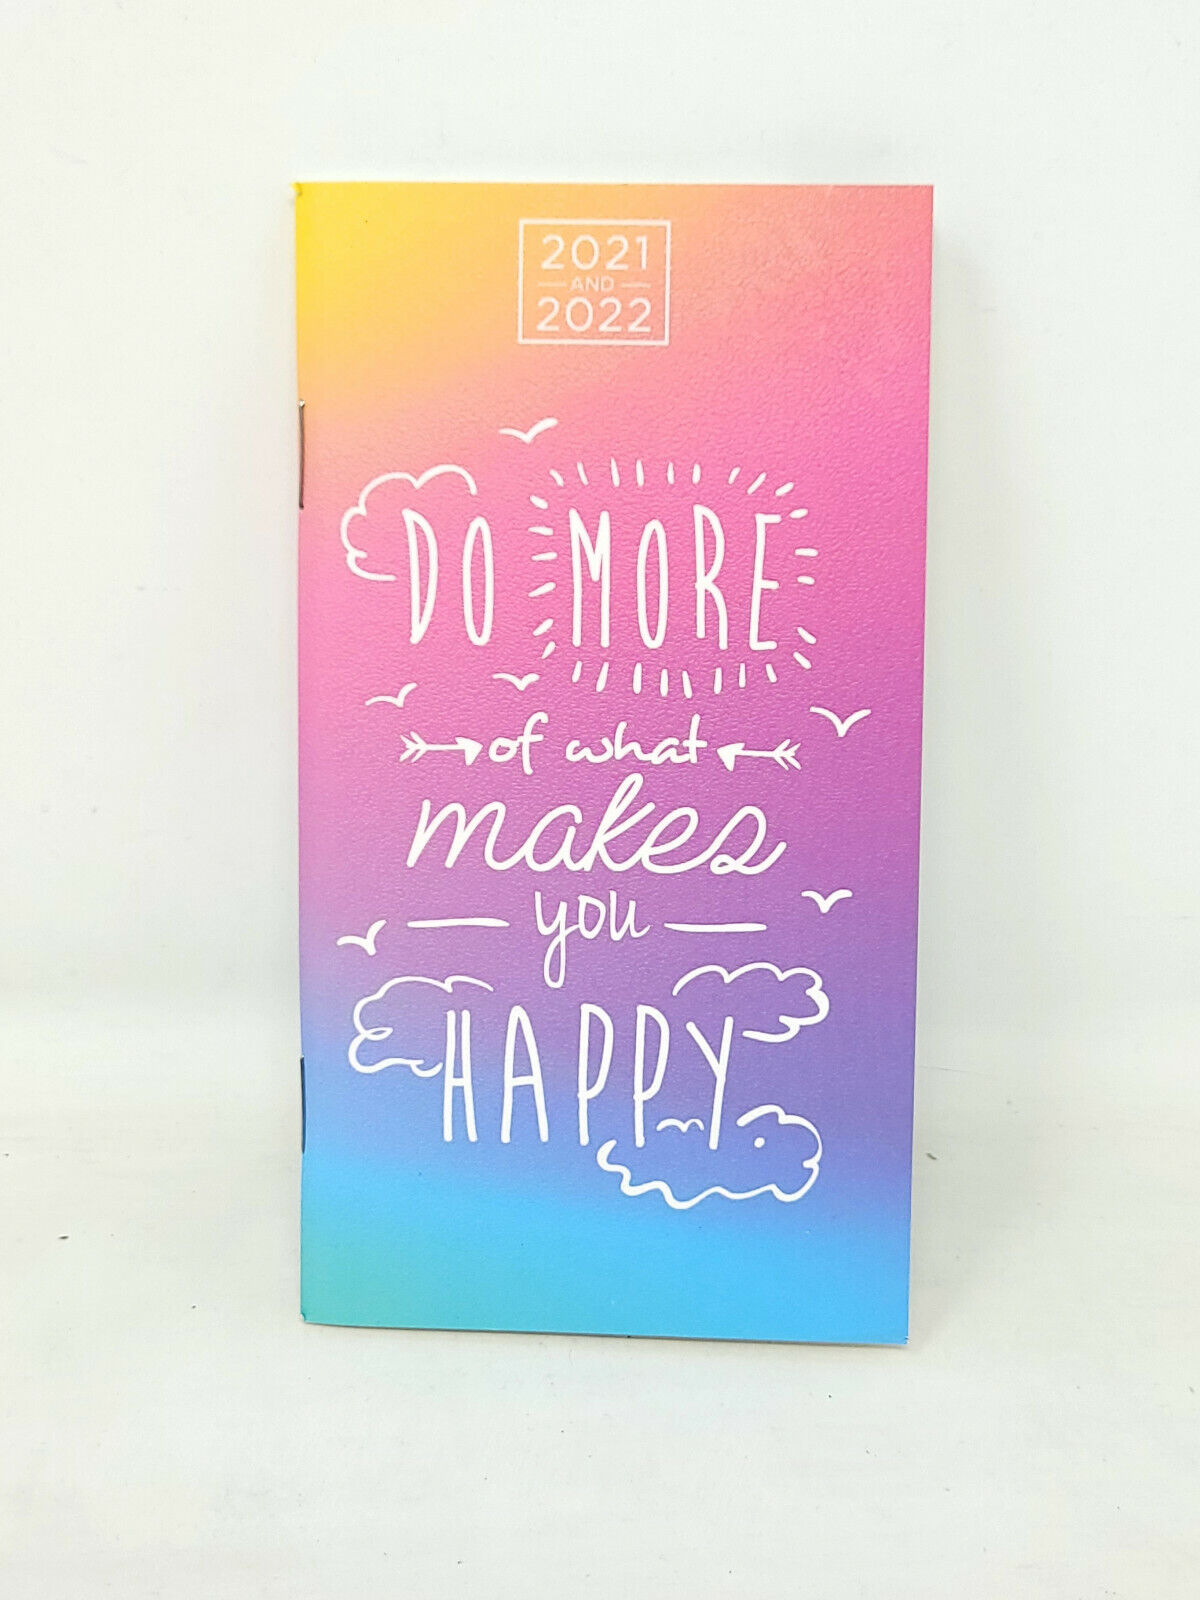 2021-2022 Pocket Planner Monthly Calendar "Do More Happy"  6.75x3.75" - NEW